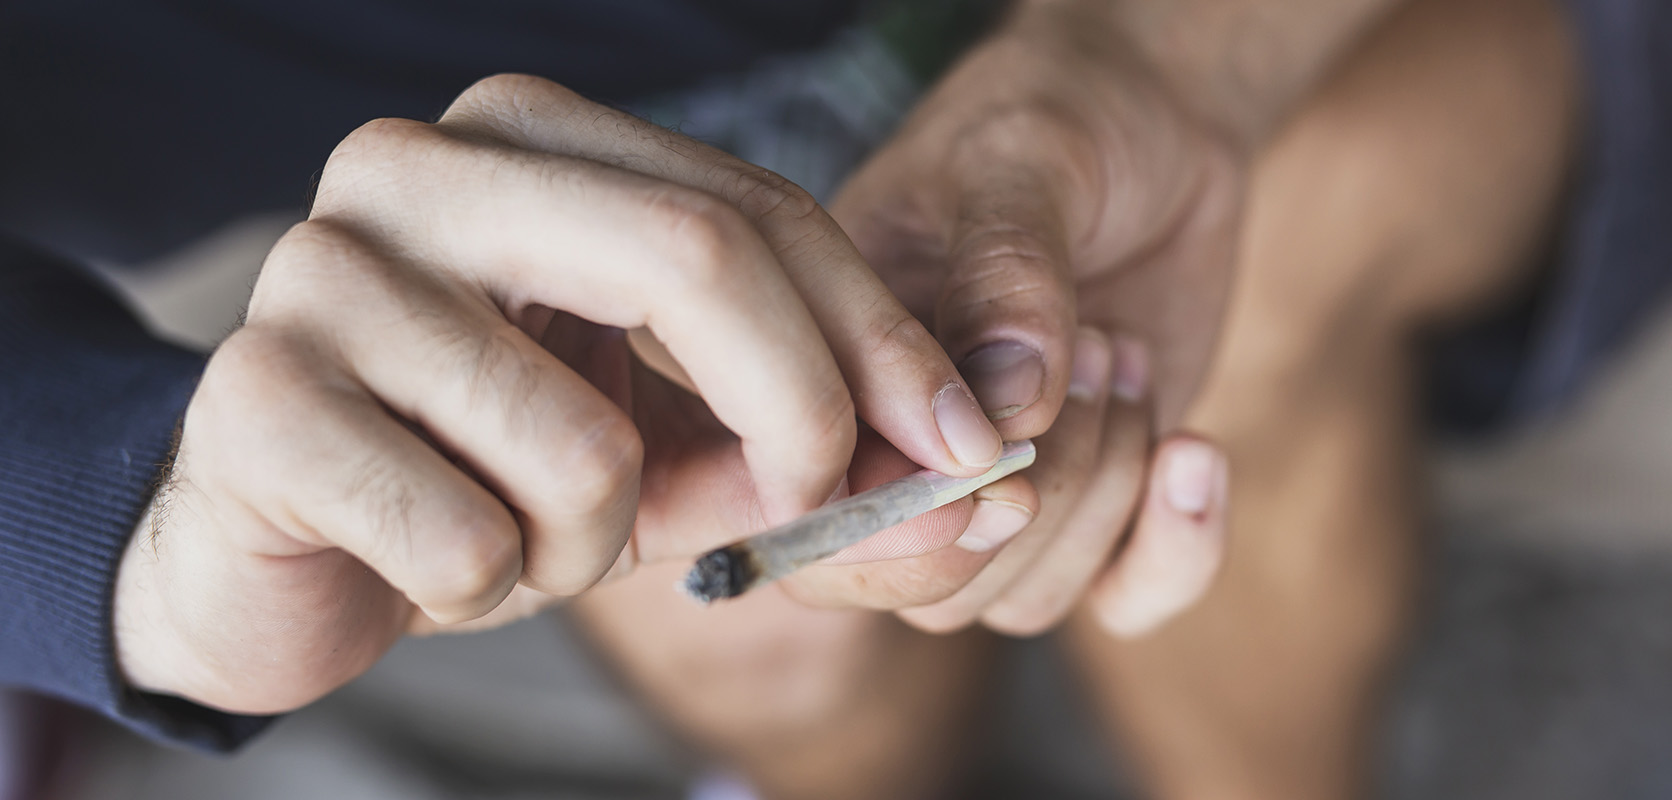 Passing a joint to a friend using proper weed etiquette. buy weed from weed dispensary for BC cannabis and cannabis canada.